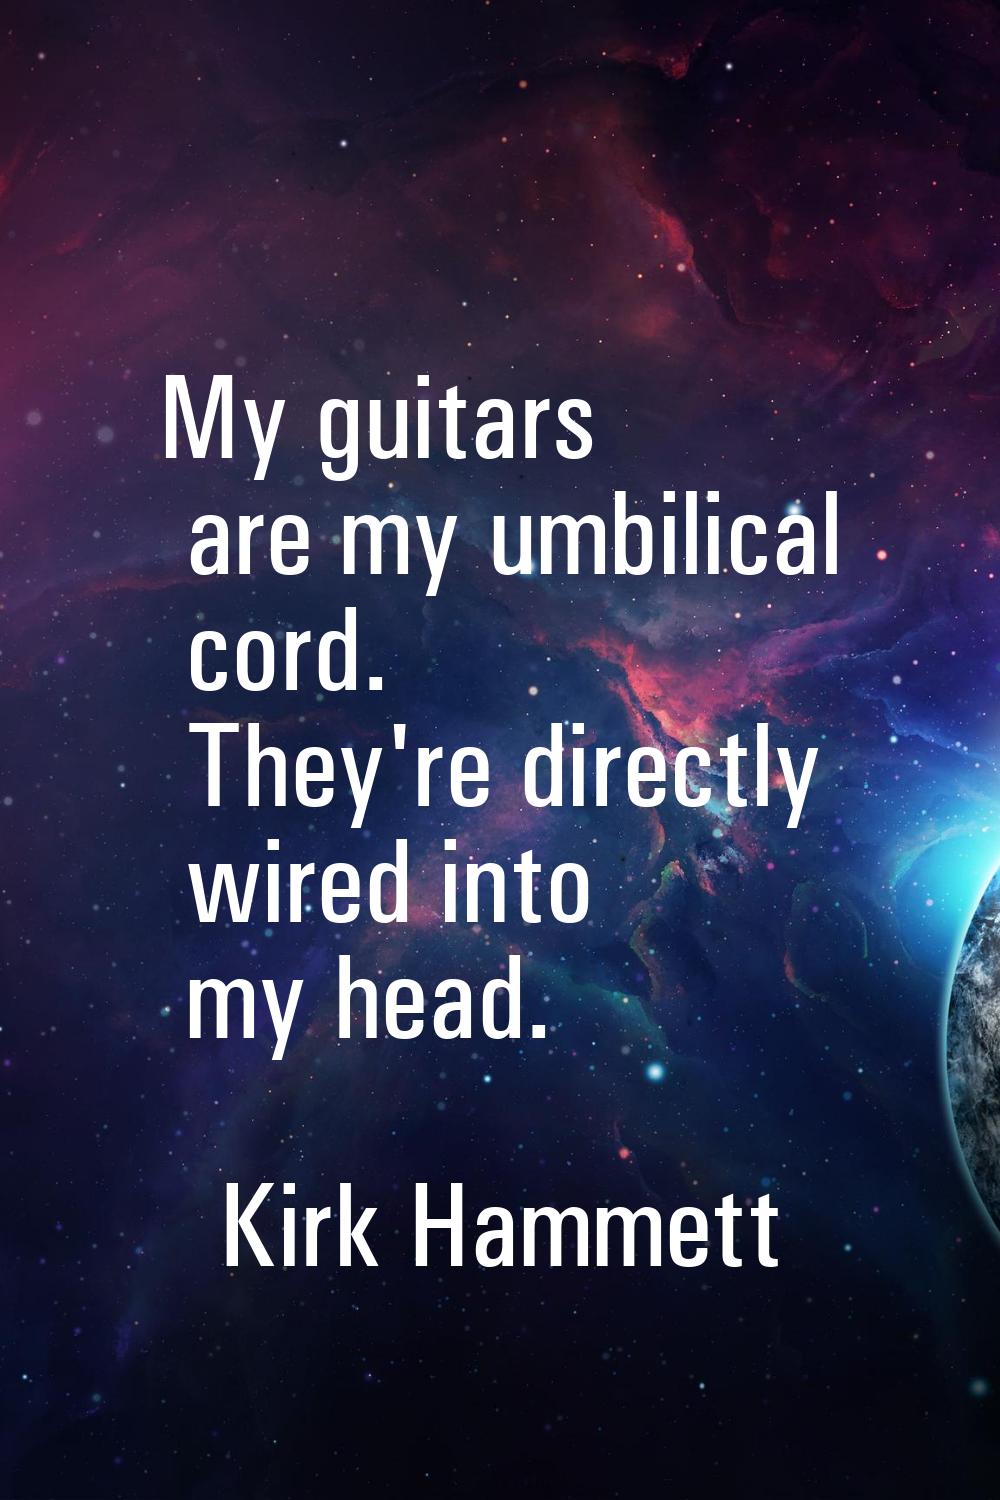 My guitars are my umbilical cord. They're directly wired into my head.